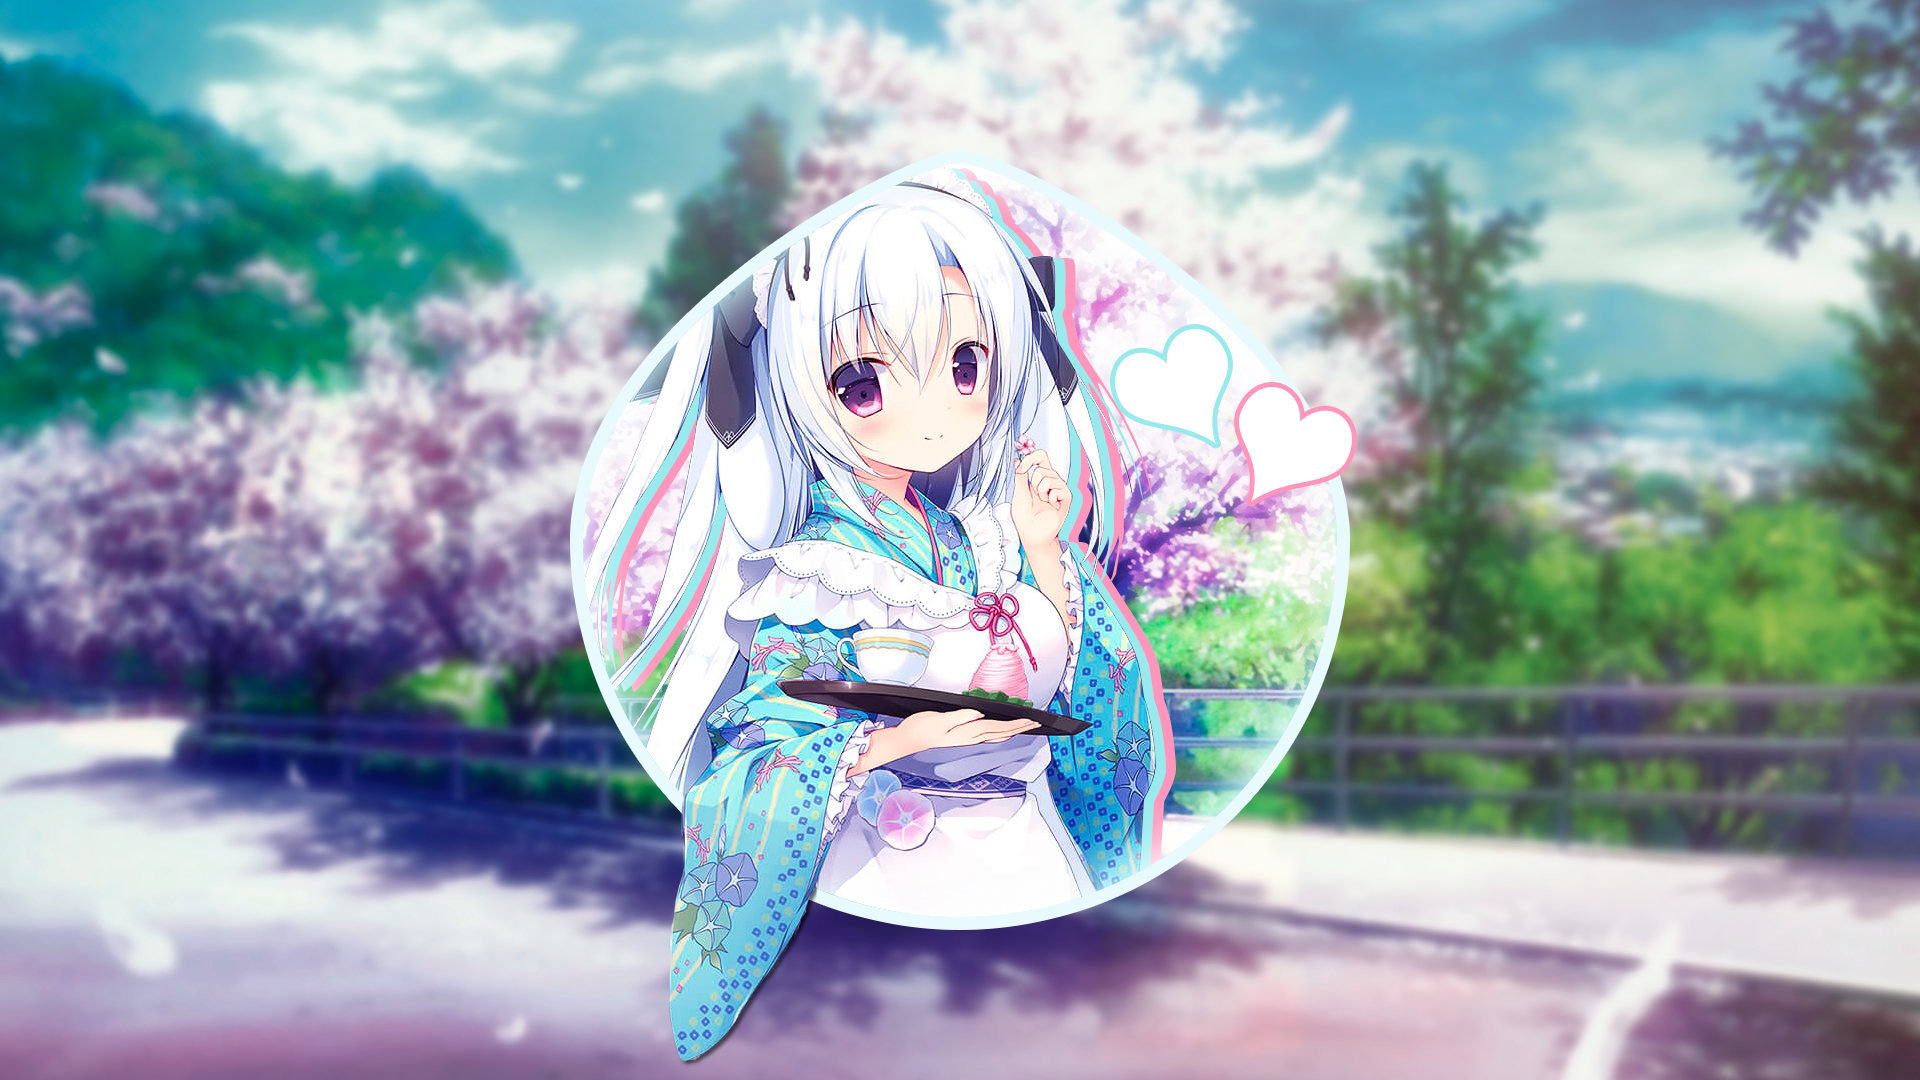 Anime 1920x1080 anime girls white hair visual novel yukata picture-in-picture bunny ears apron heart petals